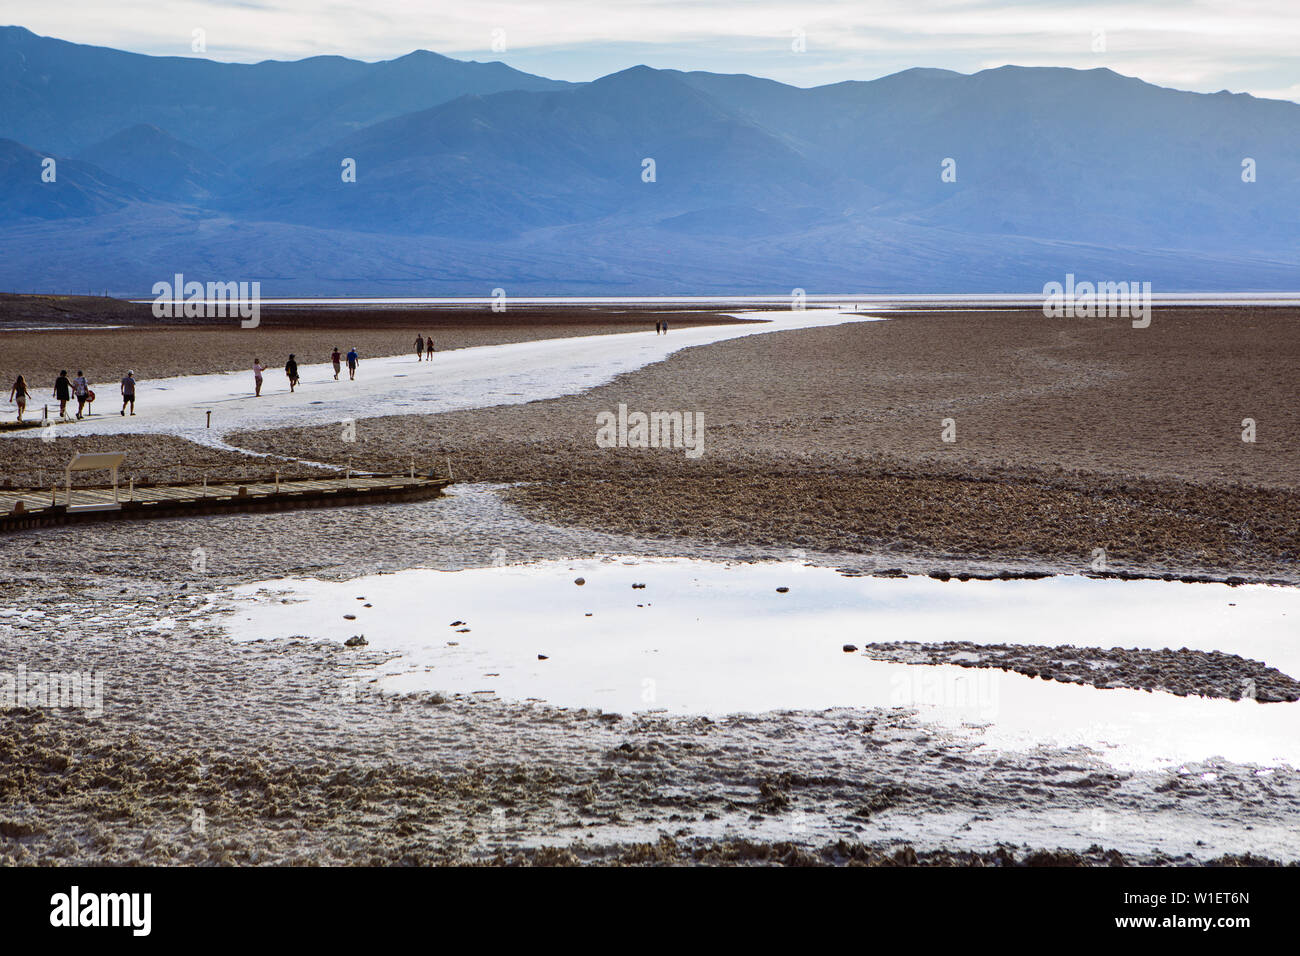 Side view of people walking across a path in Badwater basin, endorheic basin, Death Valley National Park, Inyo, California, USA Stock Photo